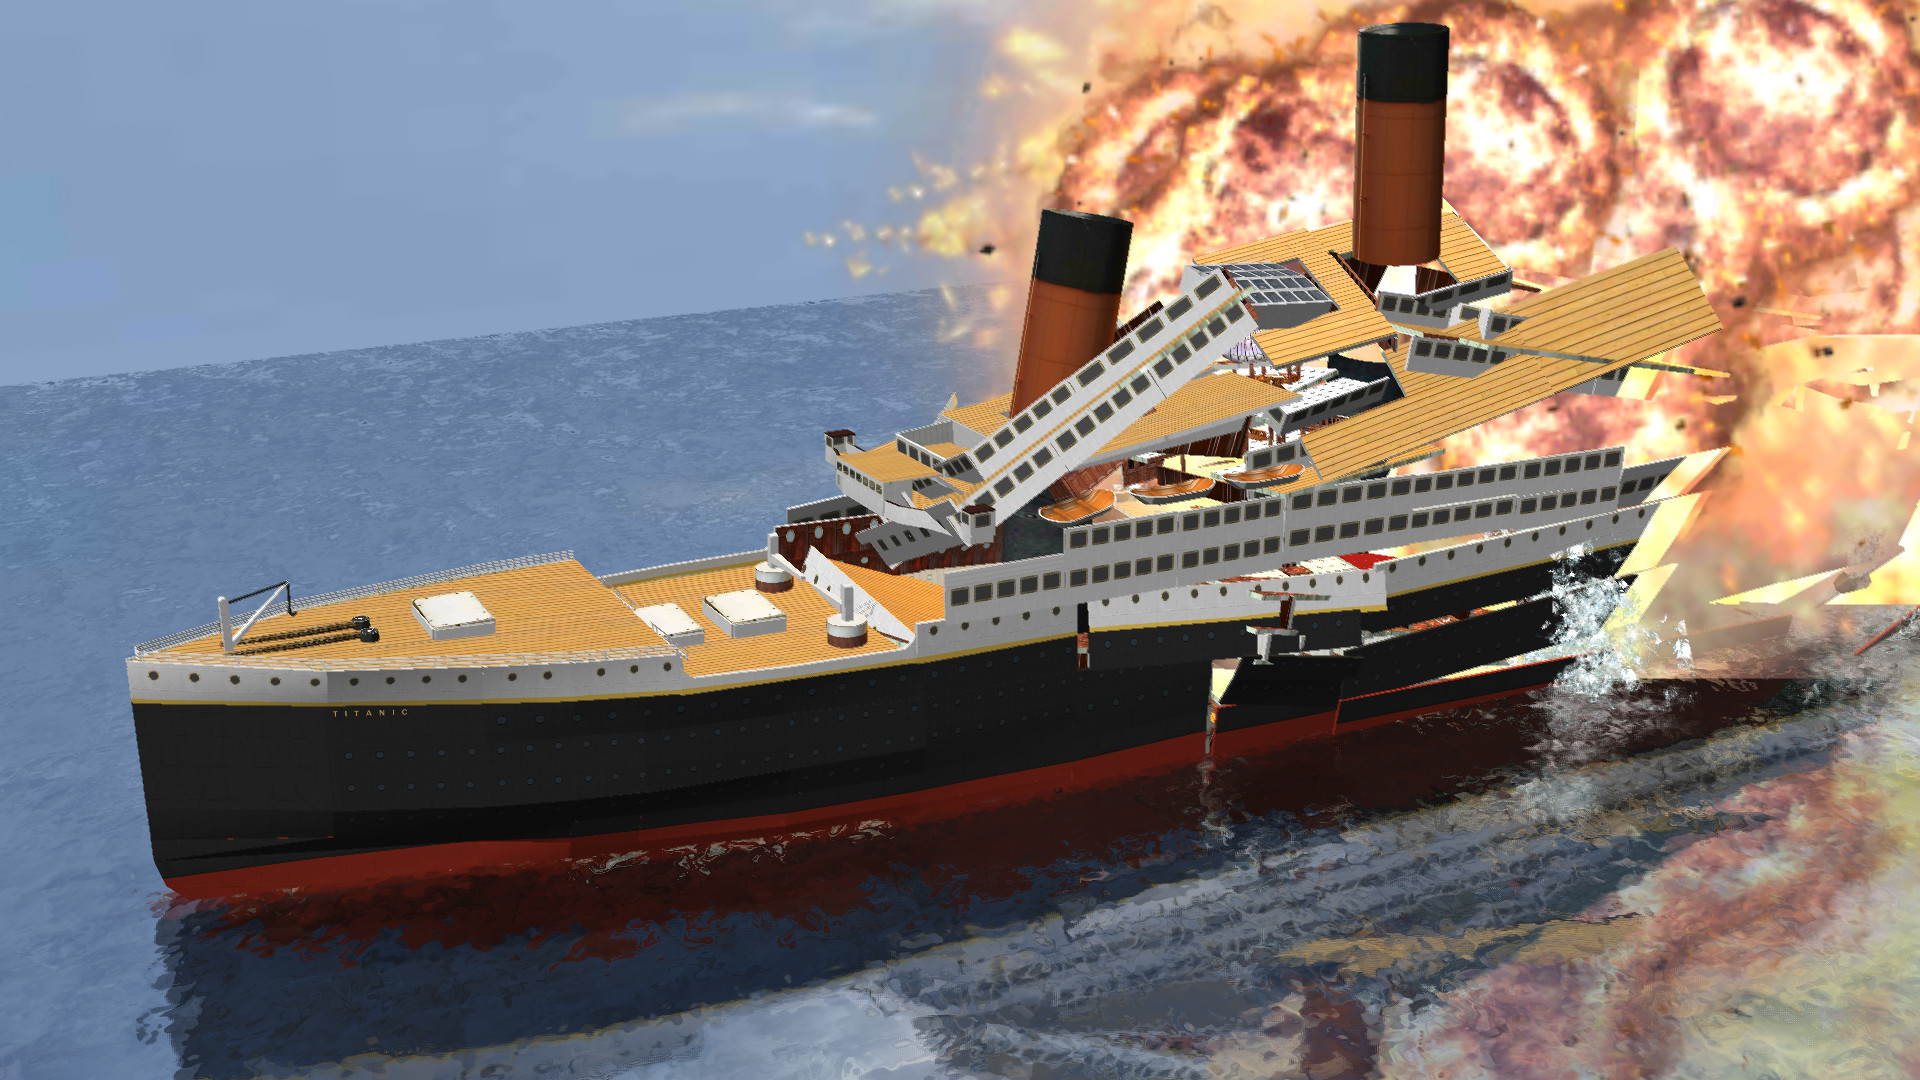 disassembly 3d titanic